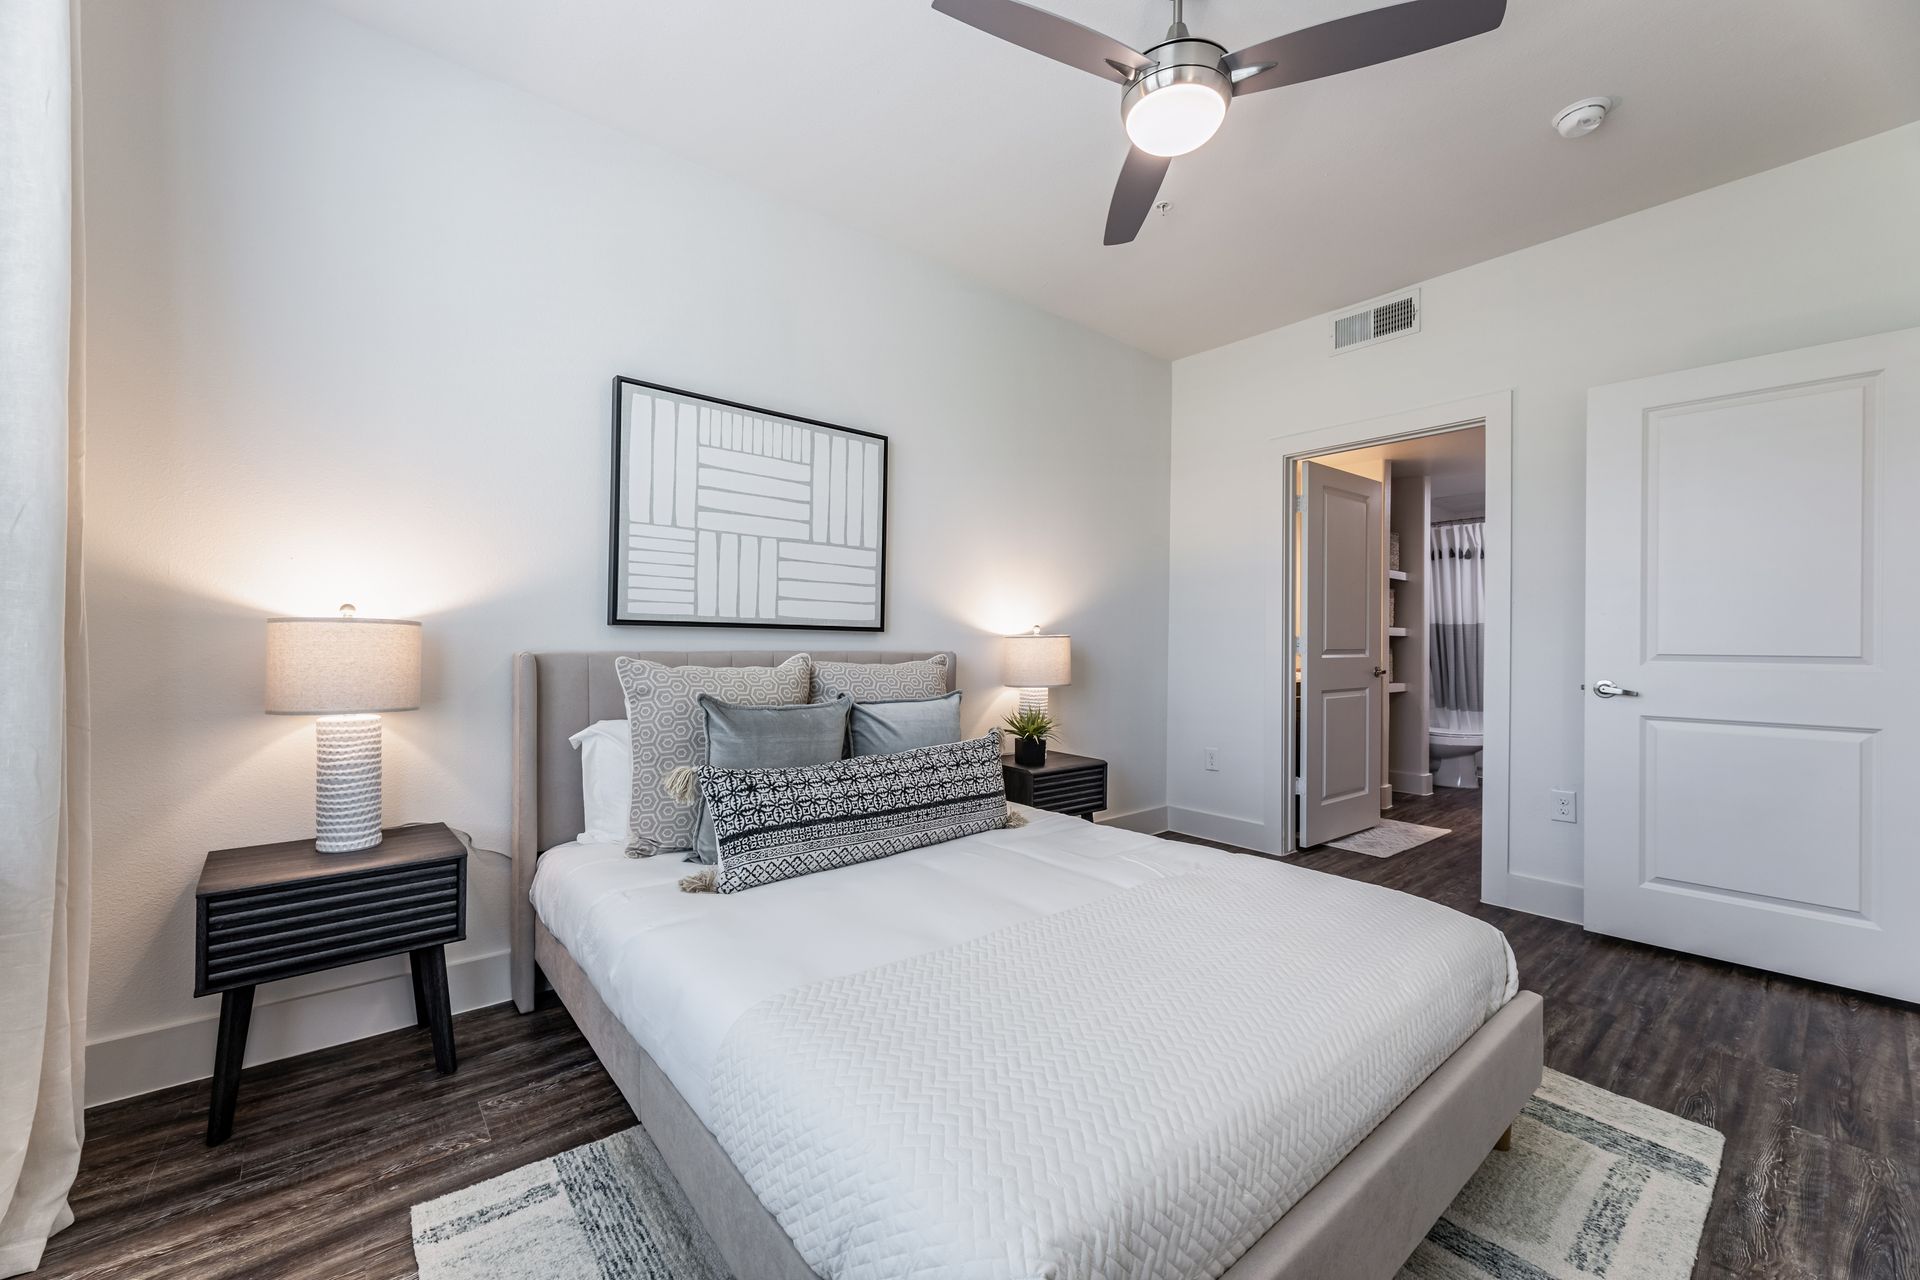 Modern bedroom with a large bed and a ceiling fan at Parkside at Craig Ranch.